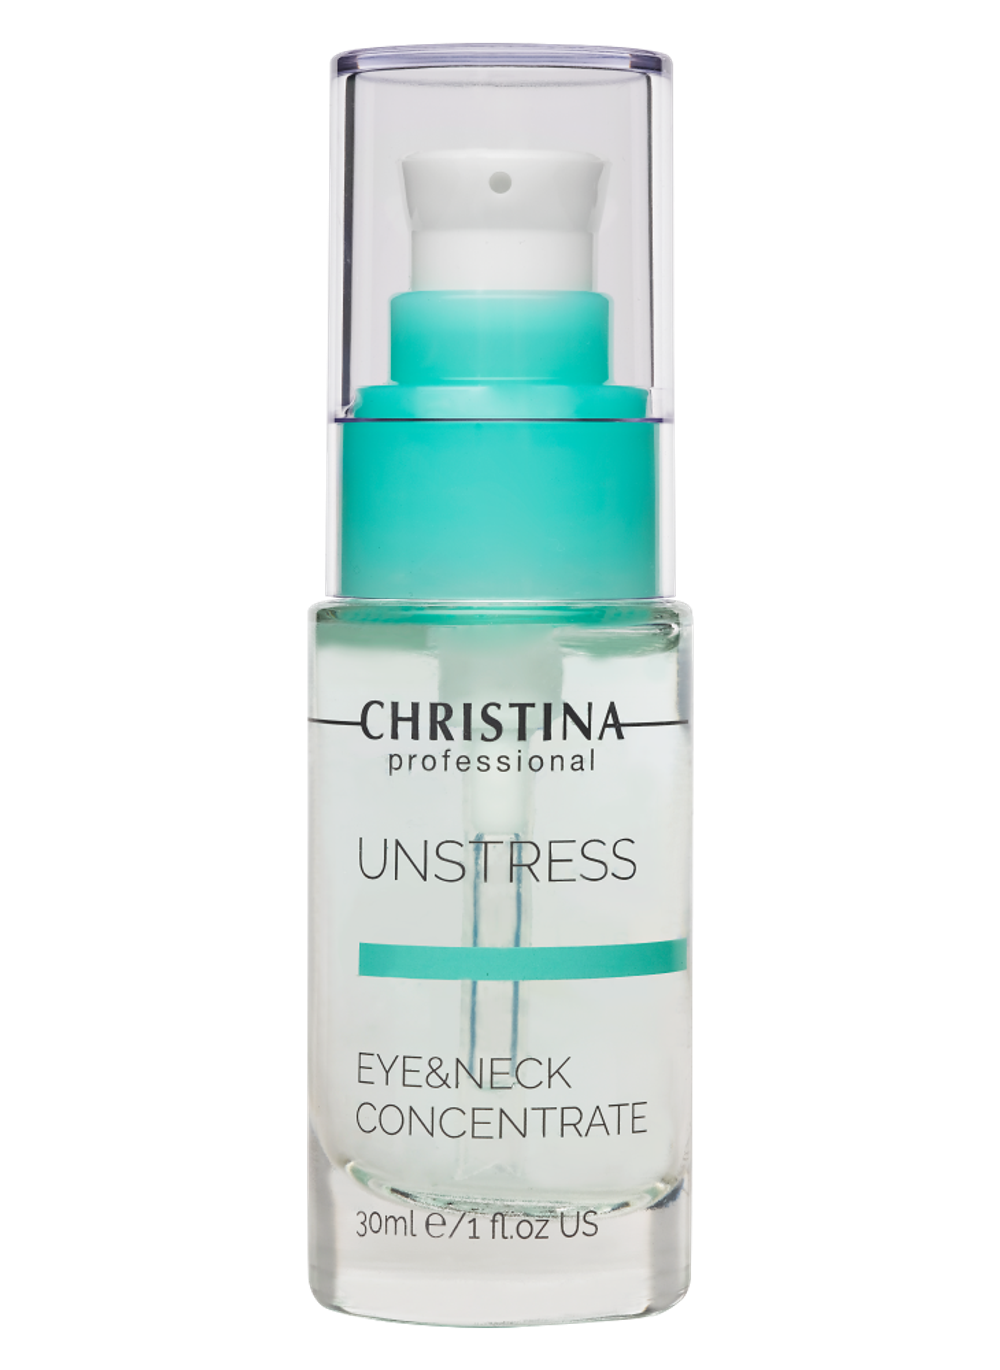 CHRISTINA Unstress Eye & Neck Concentrate